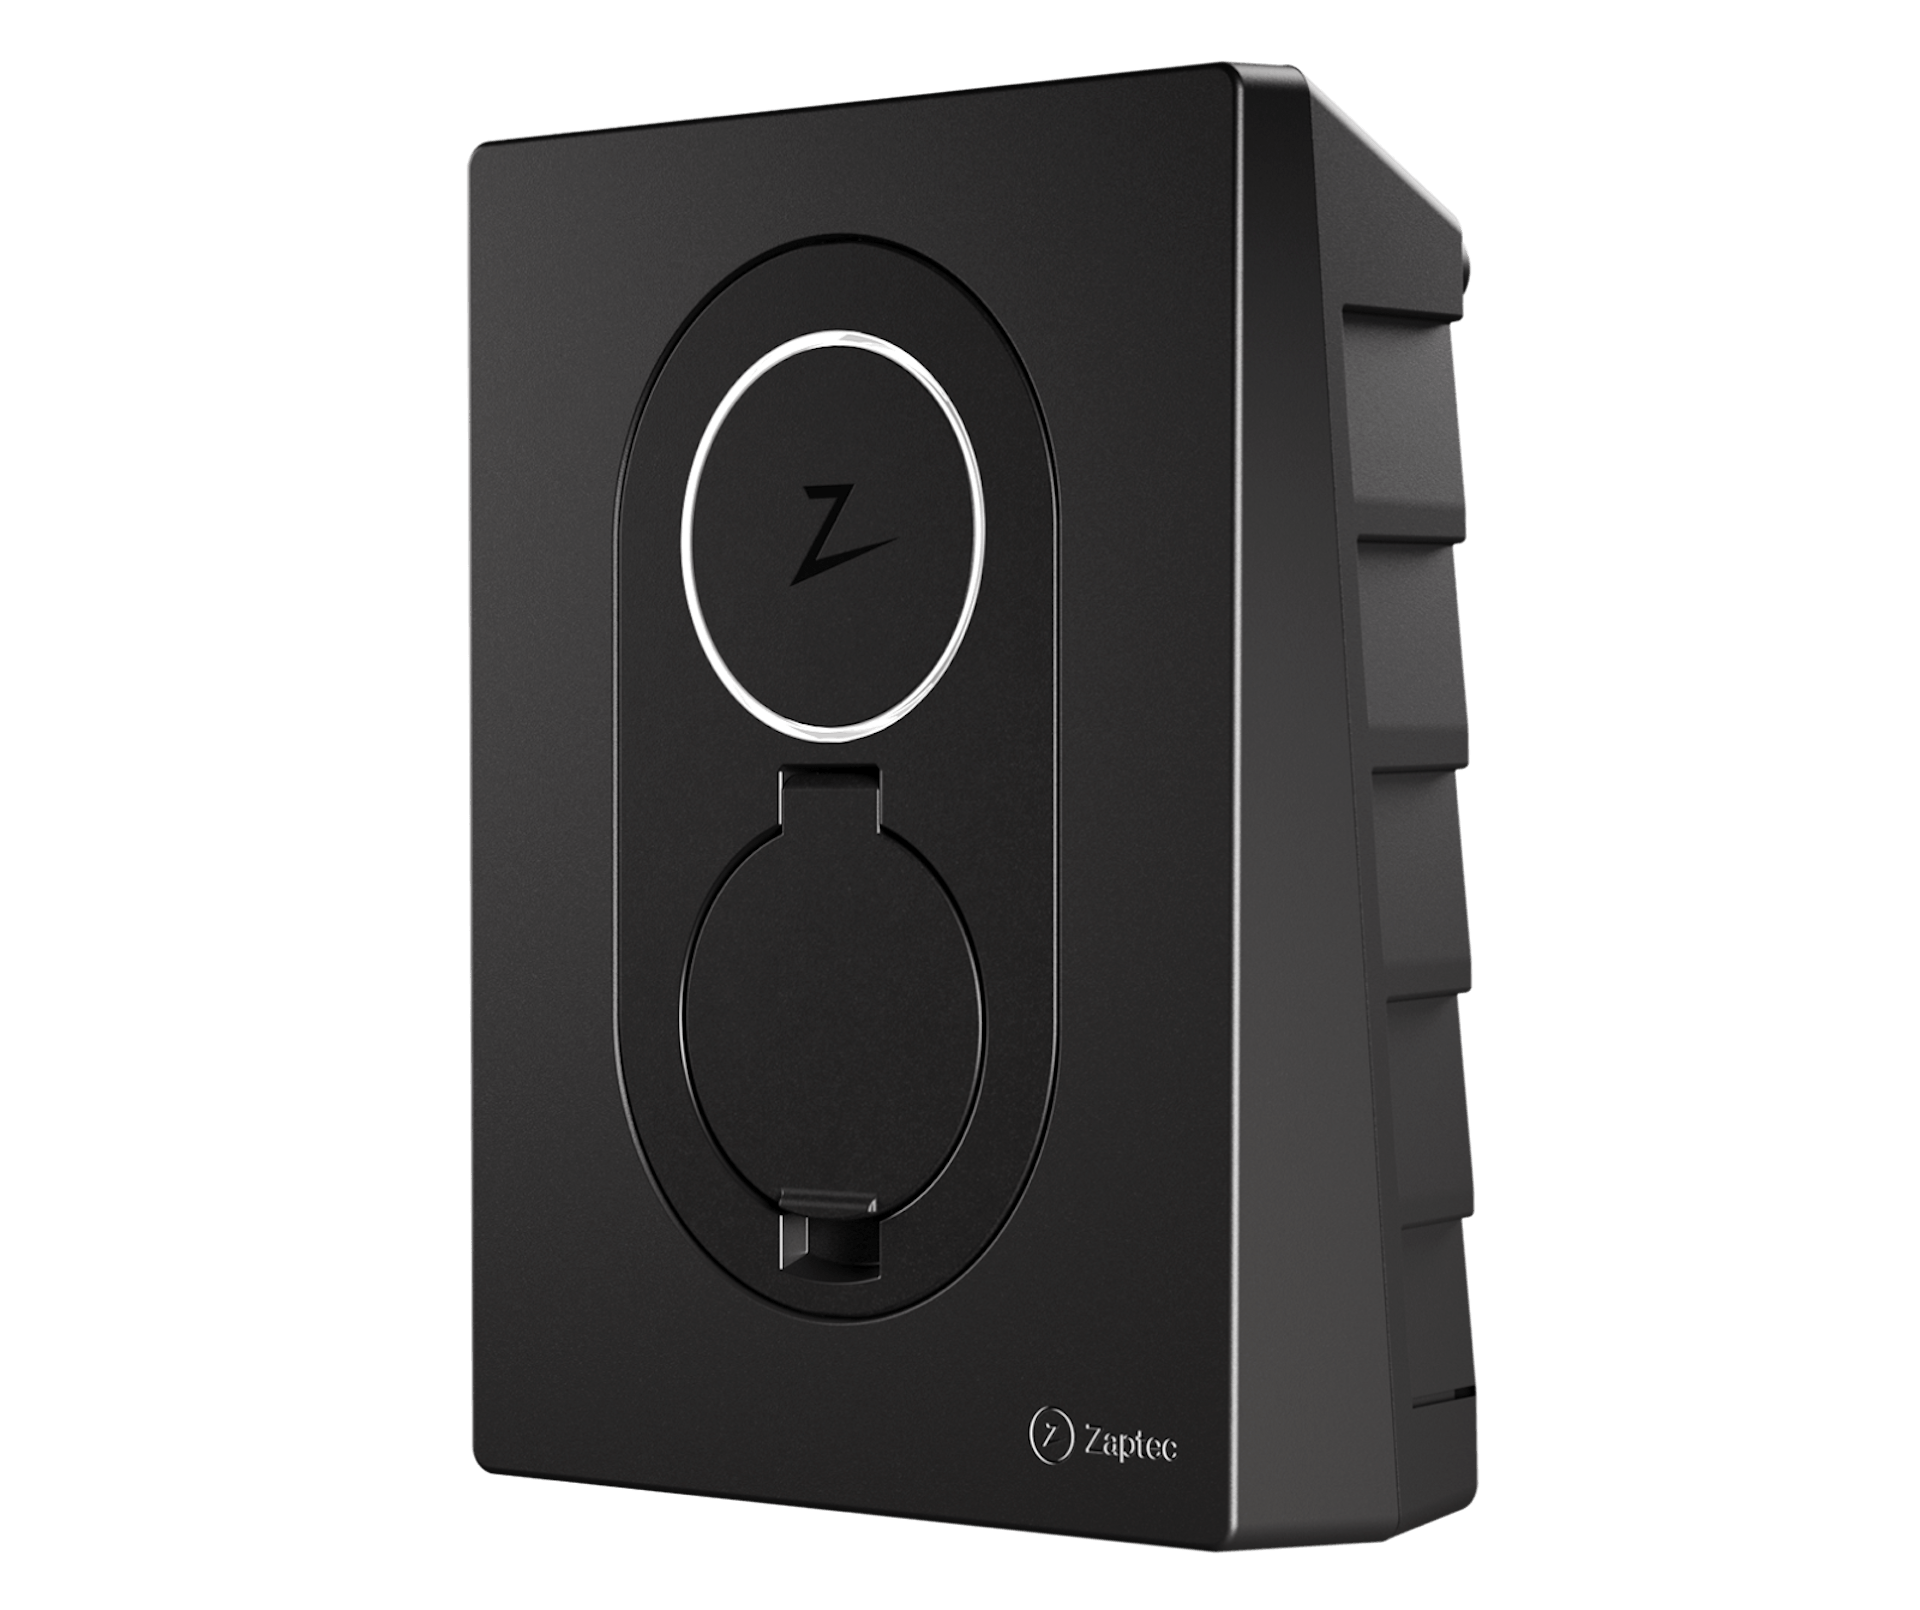 connected-charging-boxes zaptec-go-black